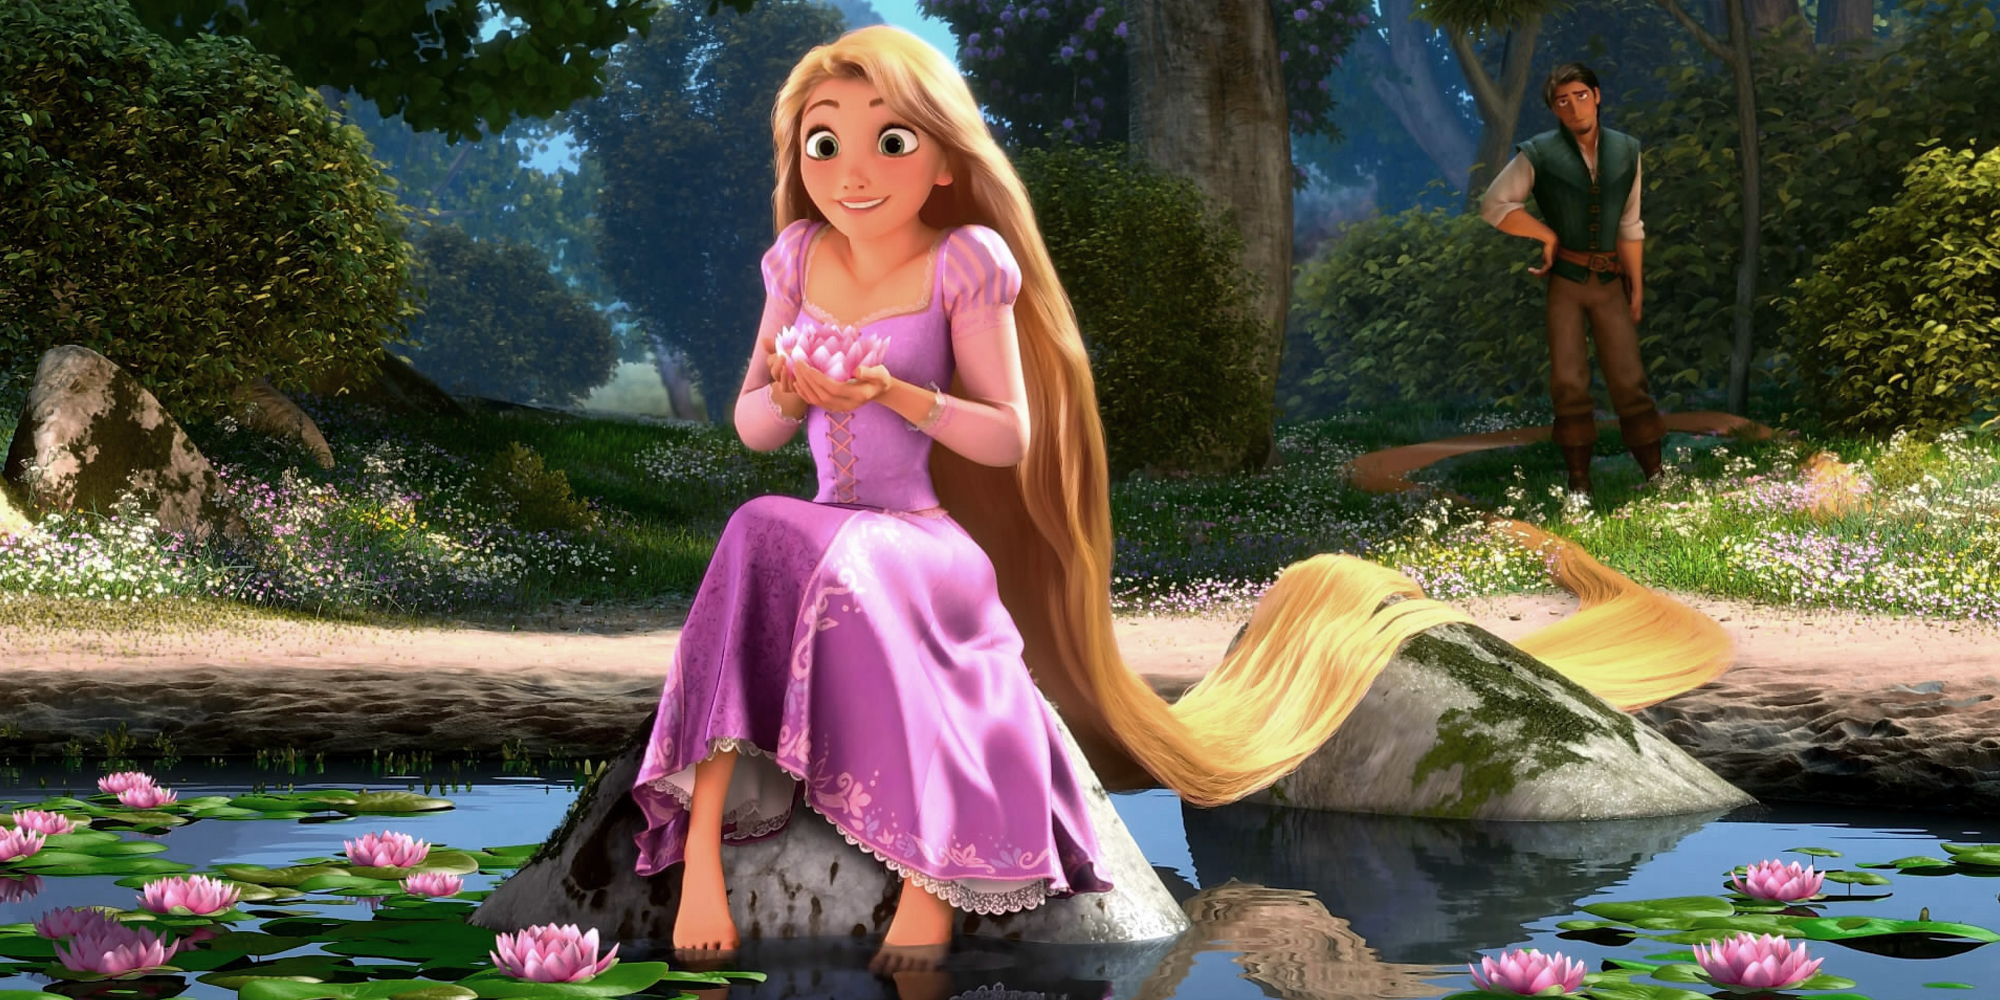 Rapunzel sat outside by a lake, with Flynn Rider in the background, in Tangled